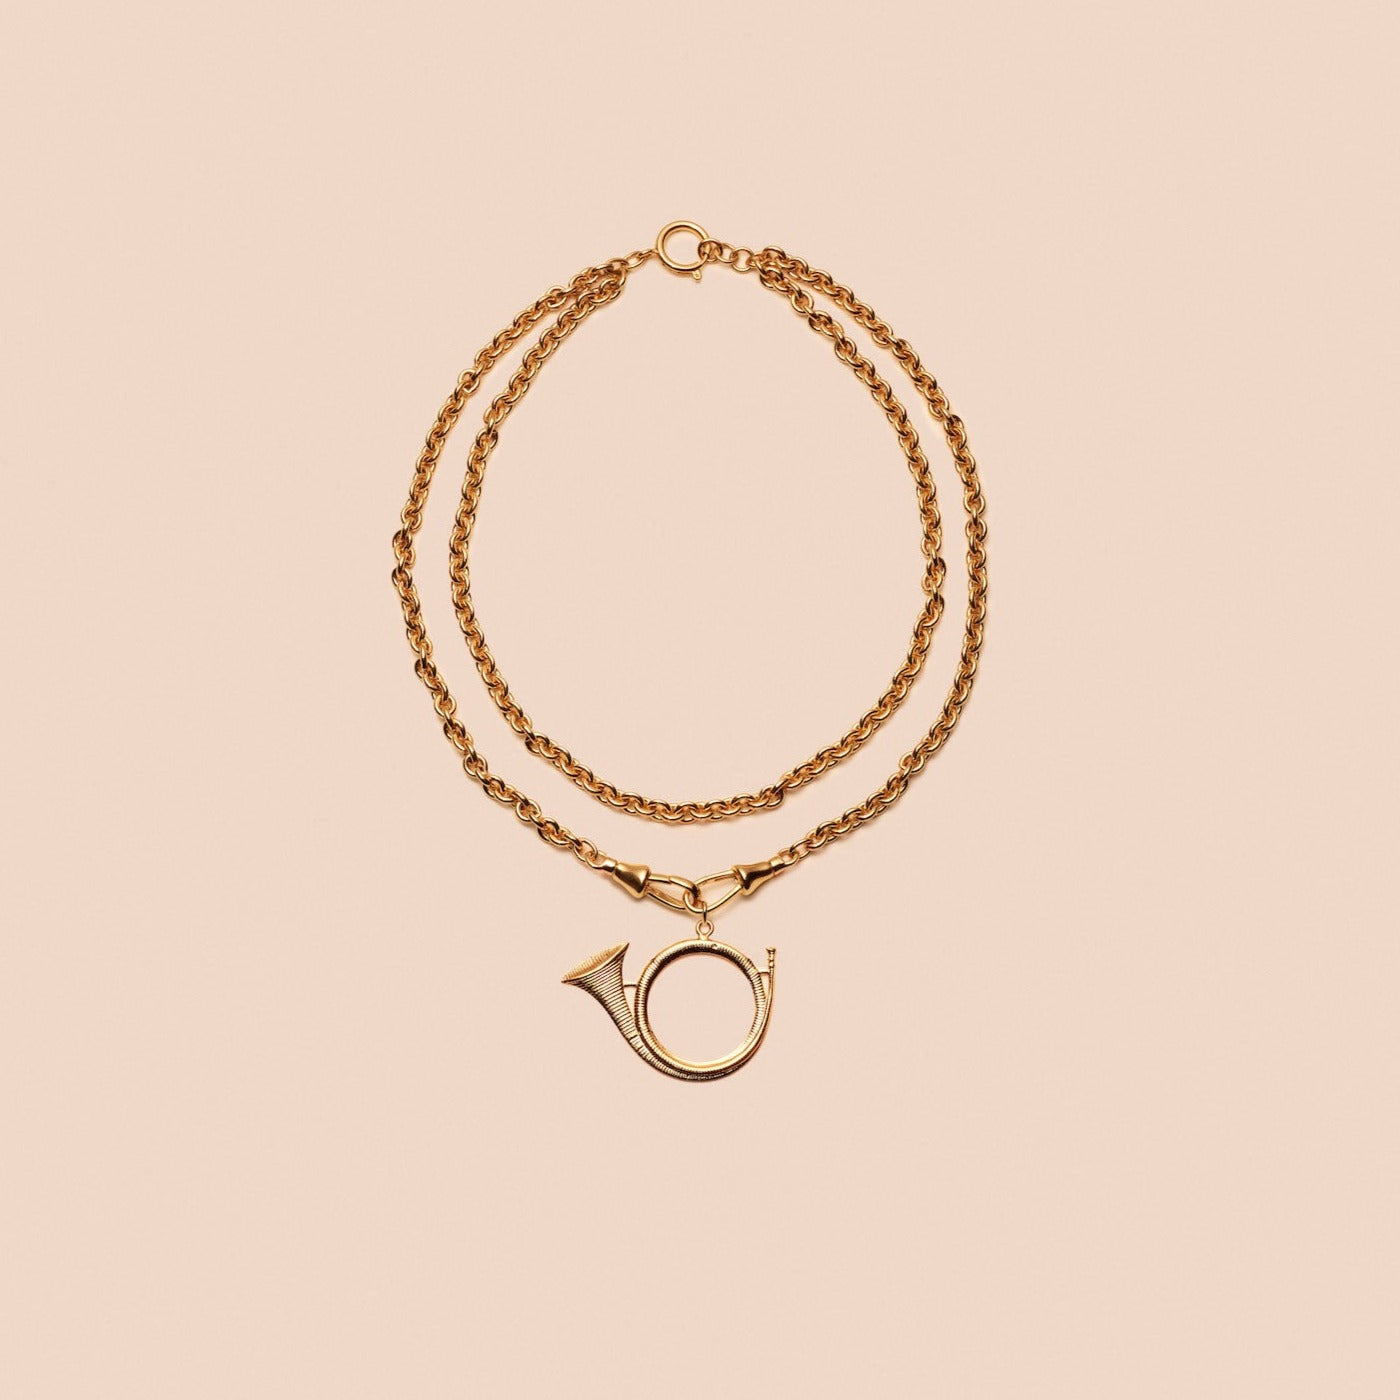 Lovers necklace